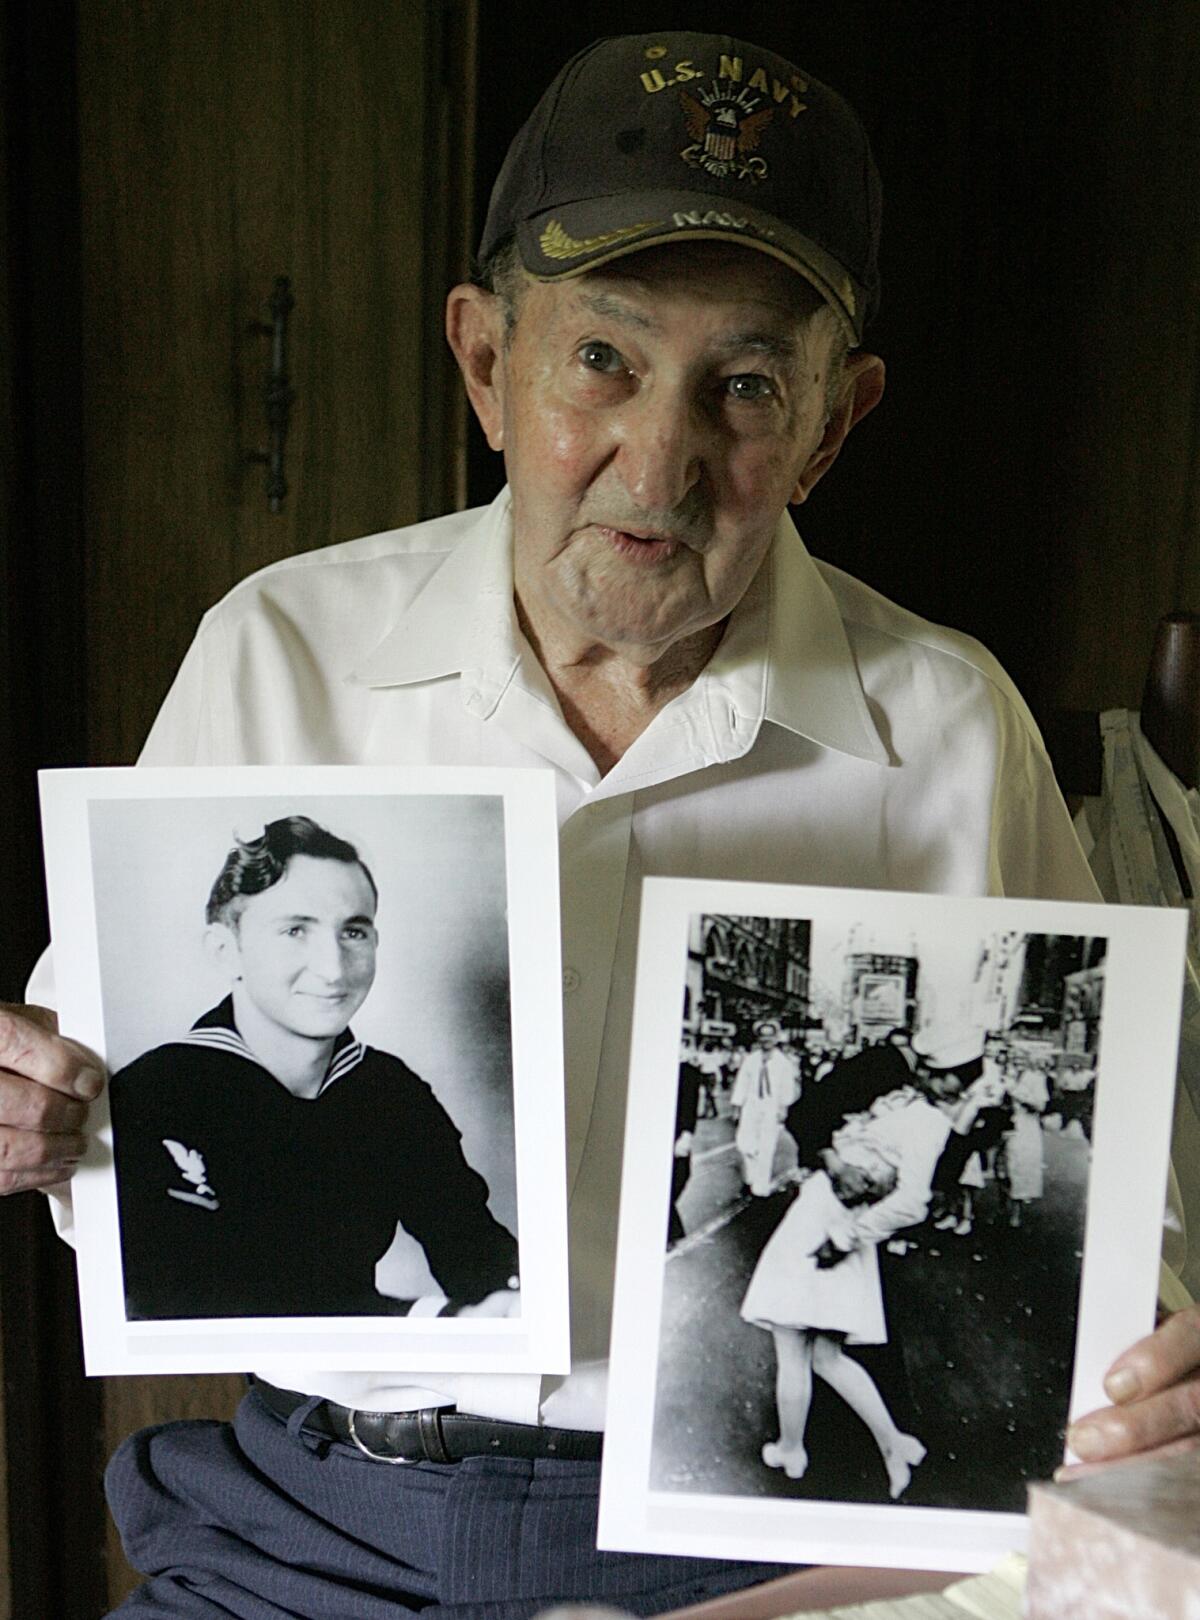 Glenn McDuffie, seen in 2007, holds a portrait of himself as a young man, left, and a copy of Alfred Eisenstaedt's iconic Life magazine shot of a sailor, who McDuffie claims is him, embracing a dental assistant in a white uniform in New York's Times Square, at his Houston home. McDuffie died on March 9 at the age of 86.